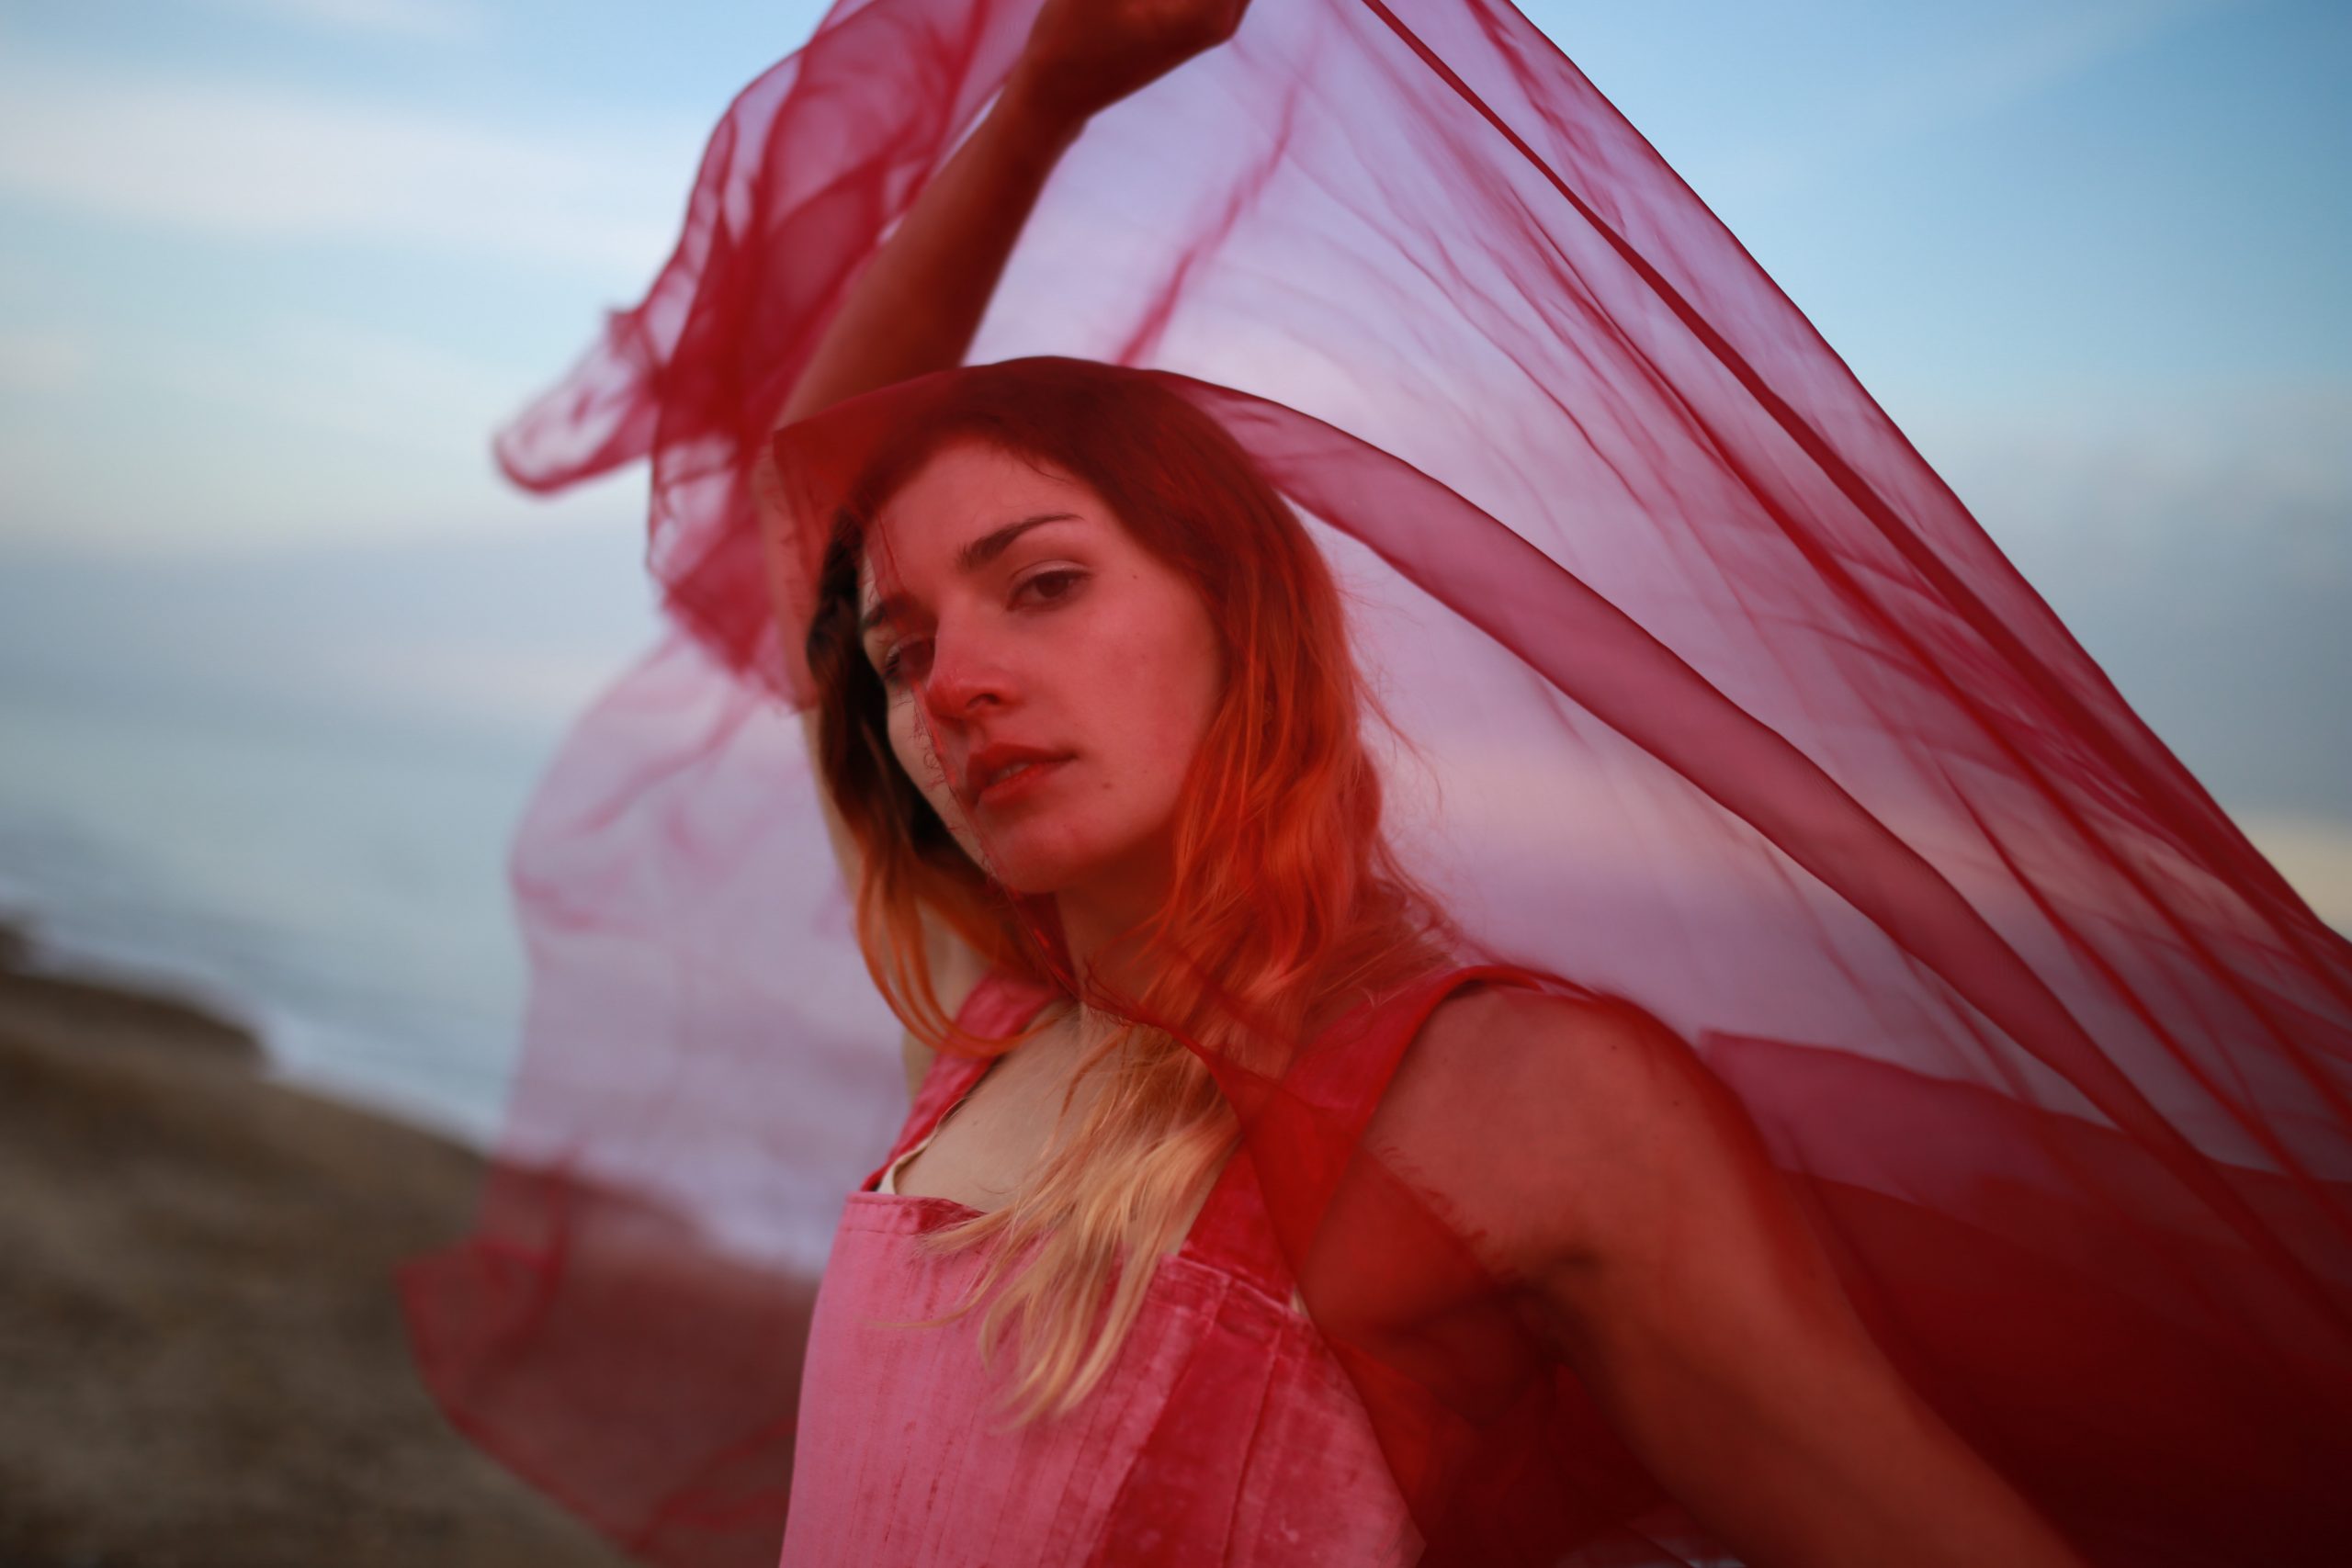 Samfire stands sideways to the camera which is angled up at her face. She drapes her face and upper body in sheer red fabric, holding it above her head. The out of focus background is coastal, with the sea and a small stretch of pebbles visible.